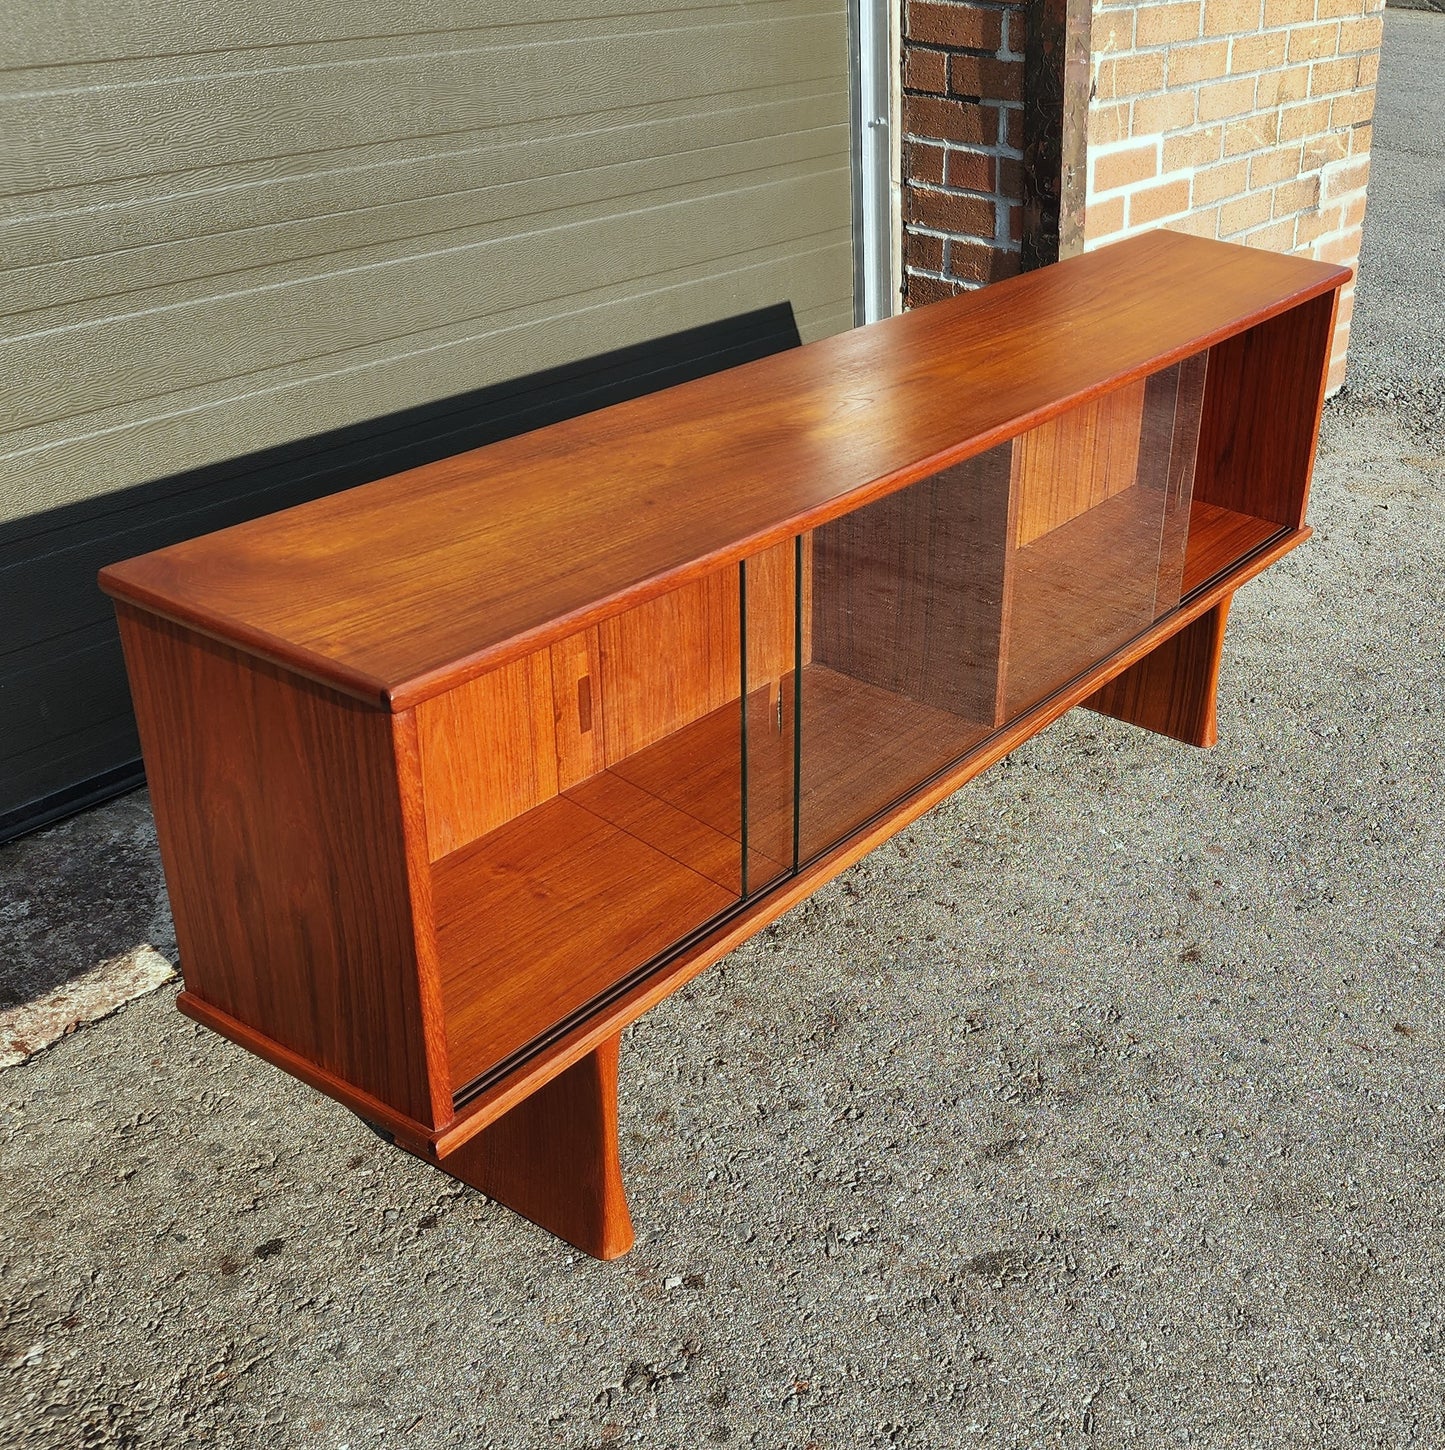 REFINISHED Mid Century Modern Teak Bookcase Display Console 5 ft